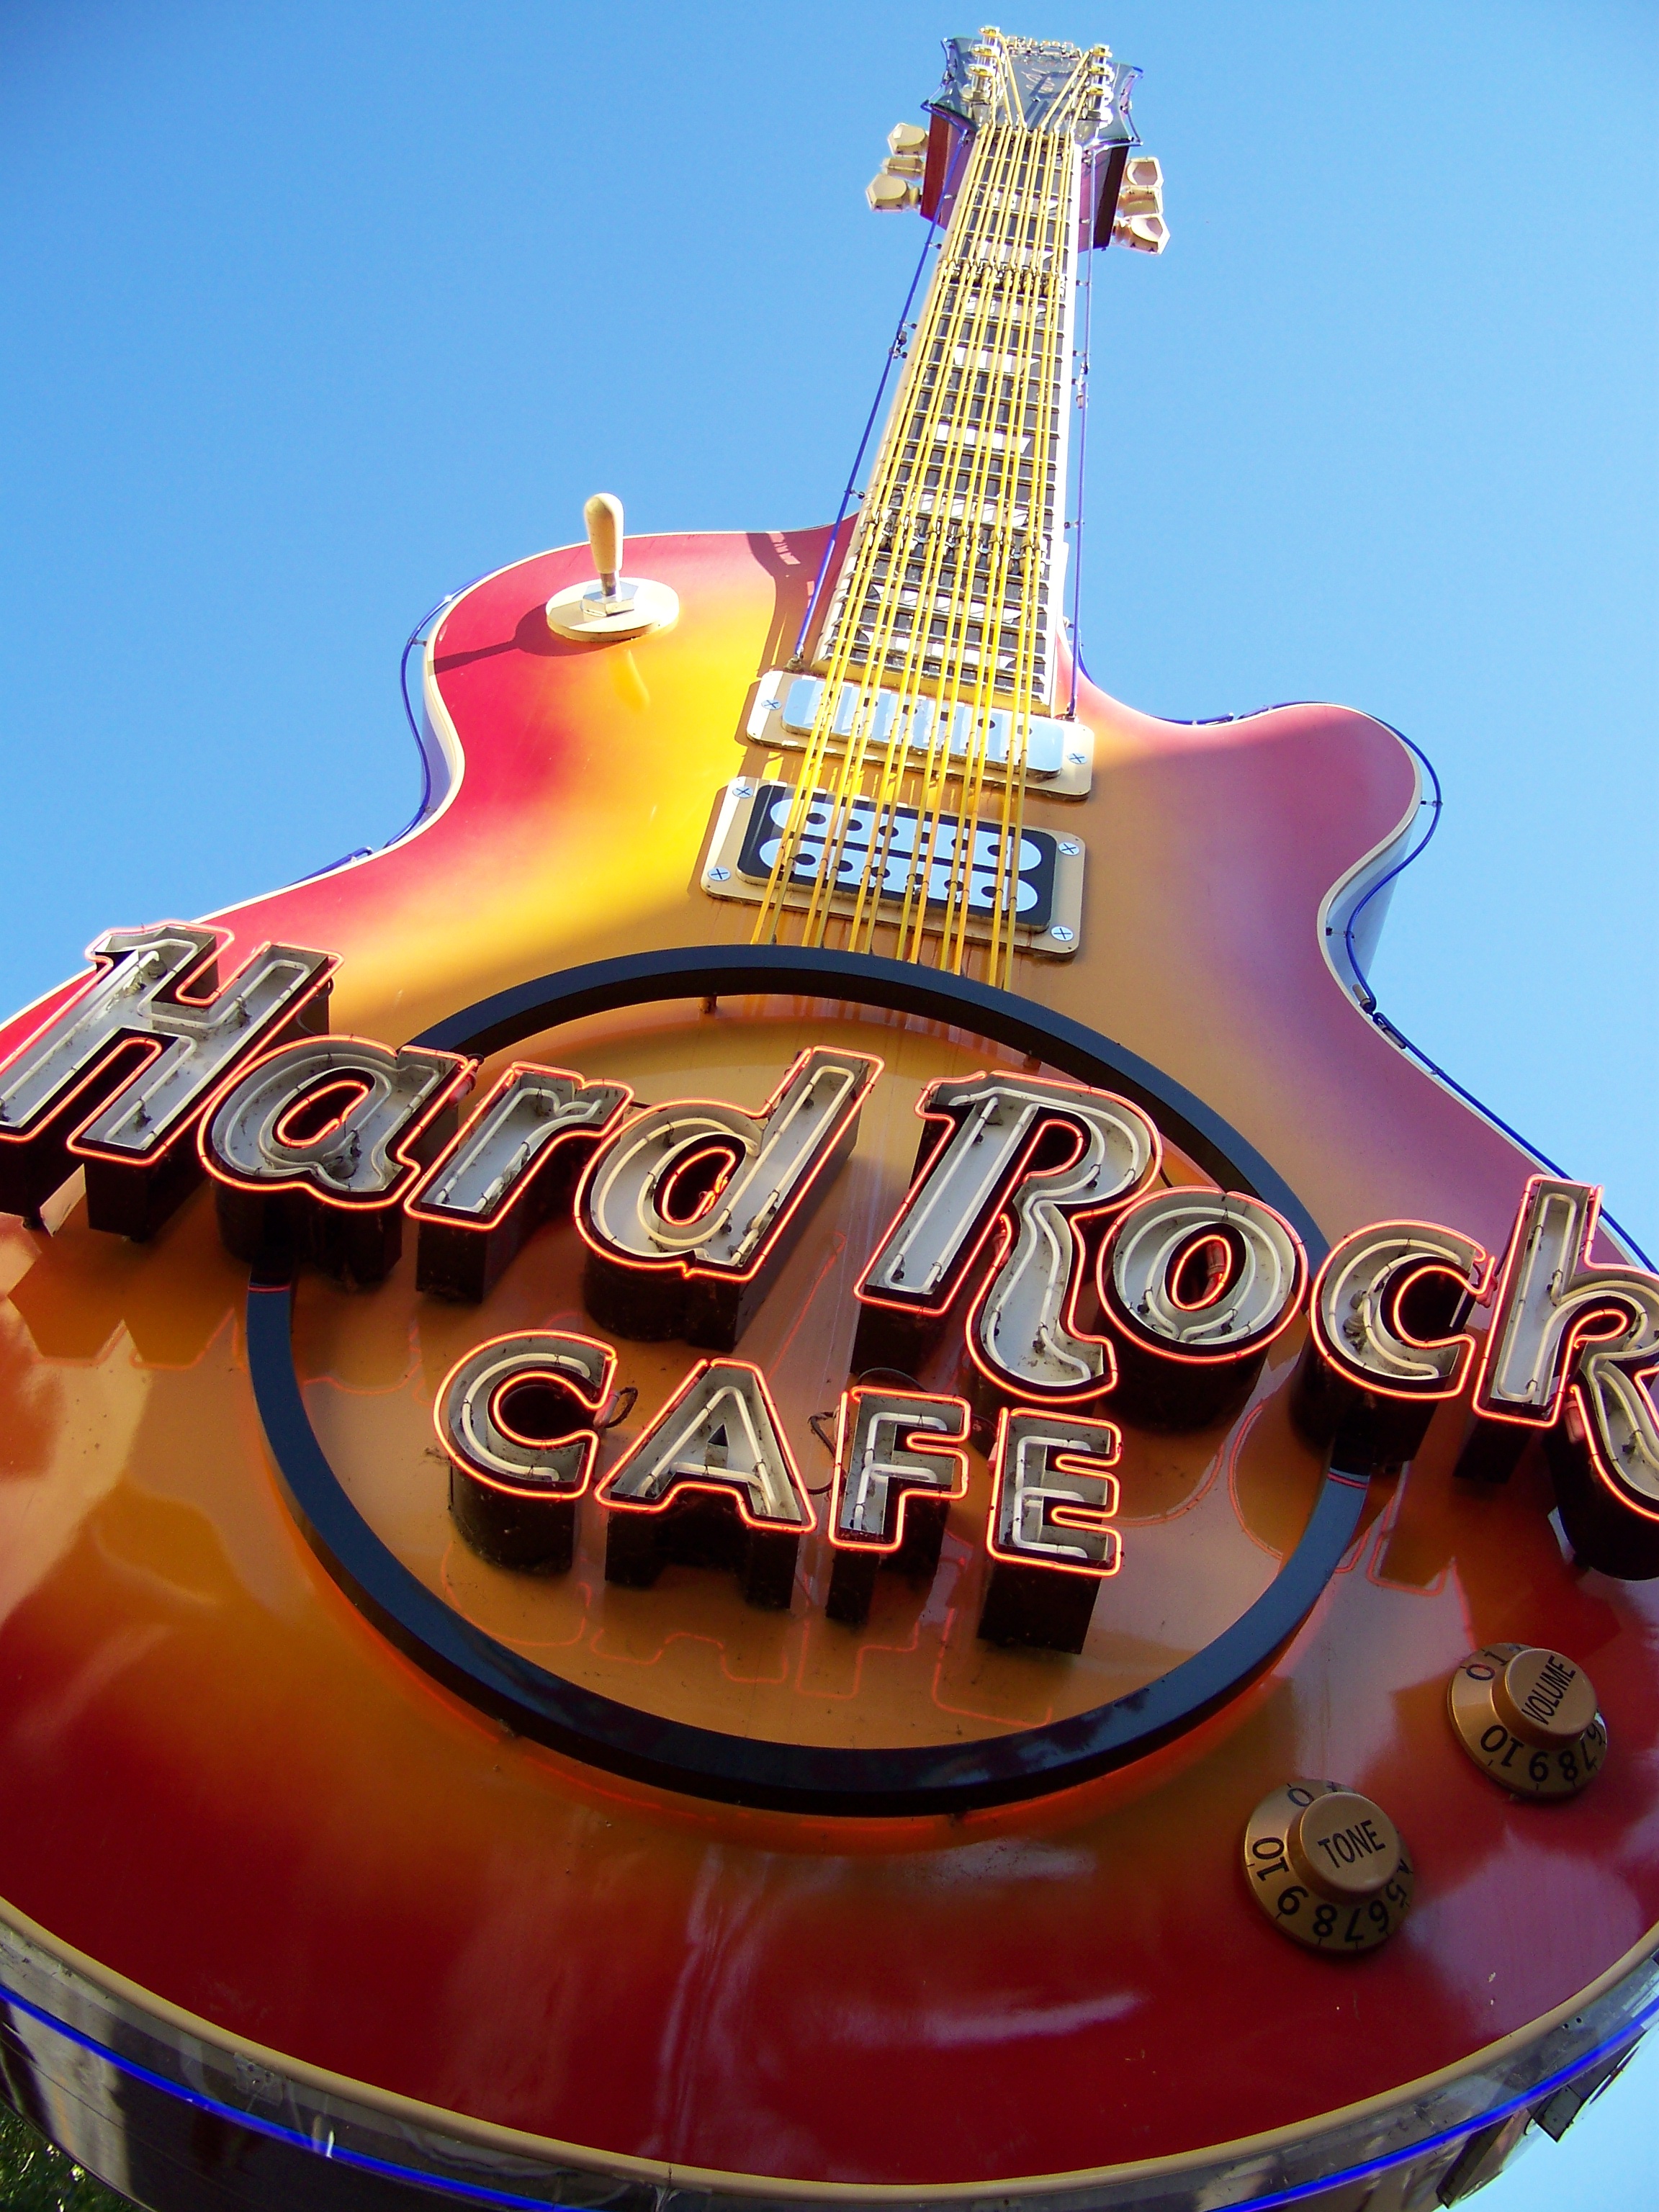 Hard Rock Cafe Wallpapers Music Hq Hard Rock Cafe Pictures 4k Wallpapers 19